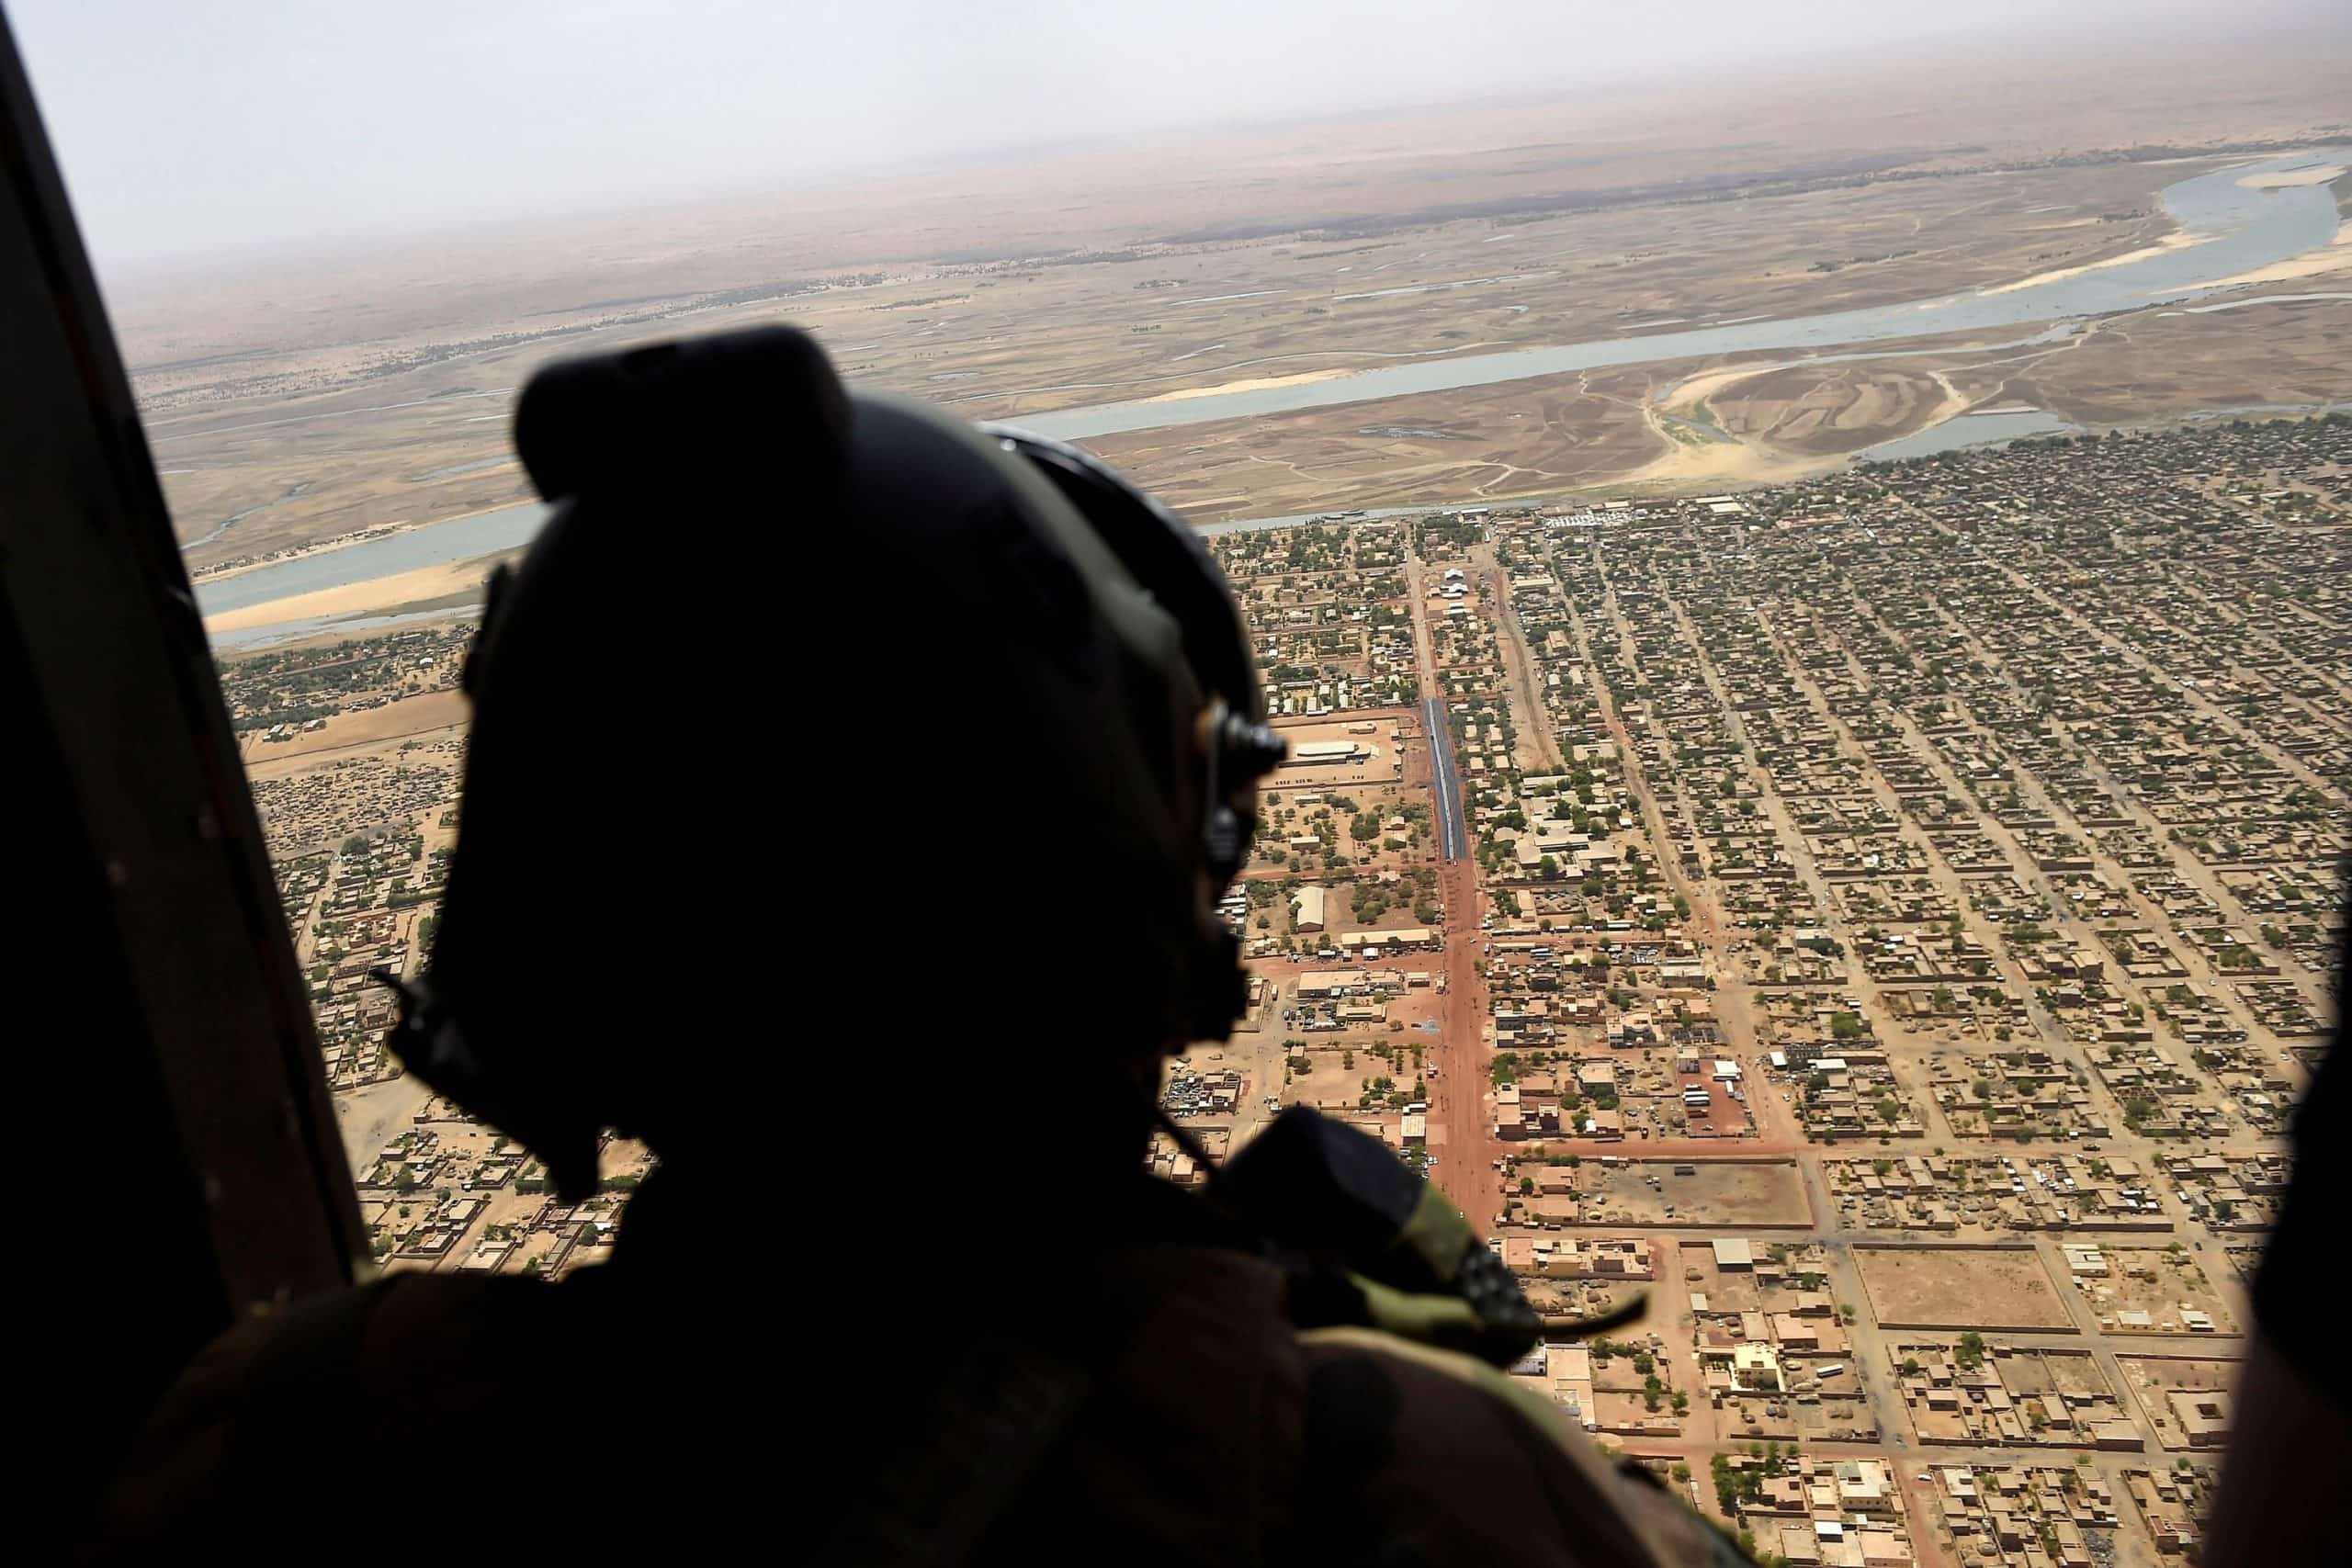 Greater UK engagement required to combat rising tide of terrorism in Sahel